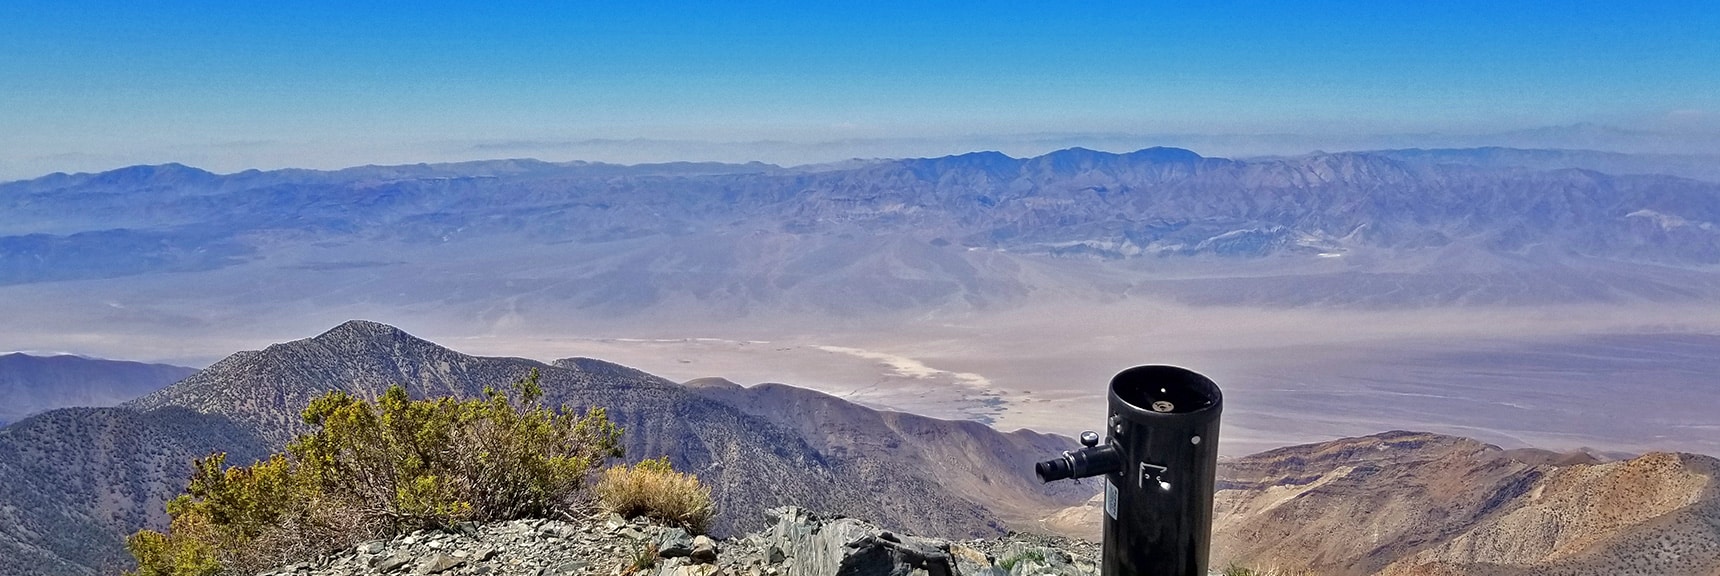 View Southwest from Telescope Peak Summit | Telescope Peak Summit from Wildrose Charcoal Kilns Parking Area, Panamint Mountains, Death Valley National Park, California